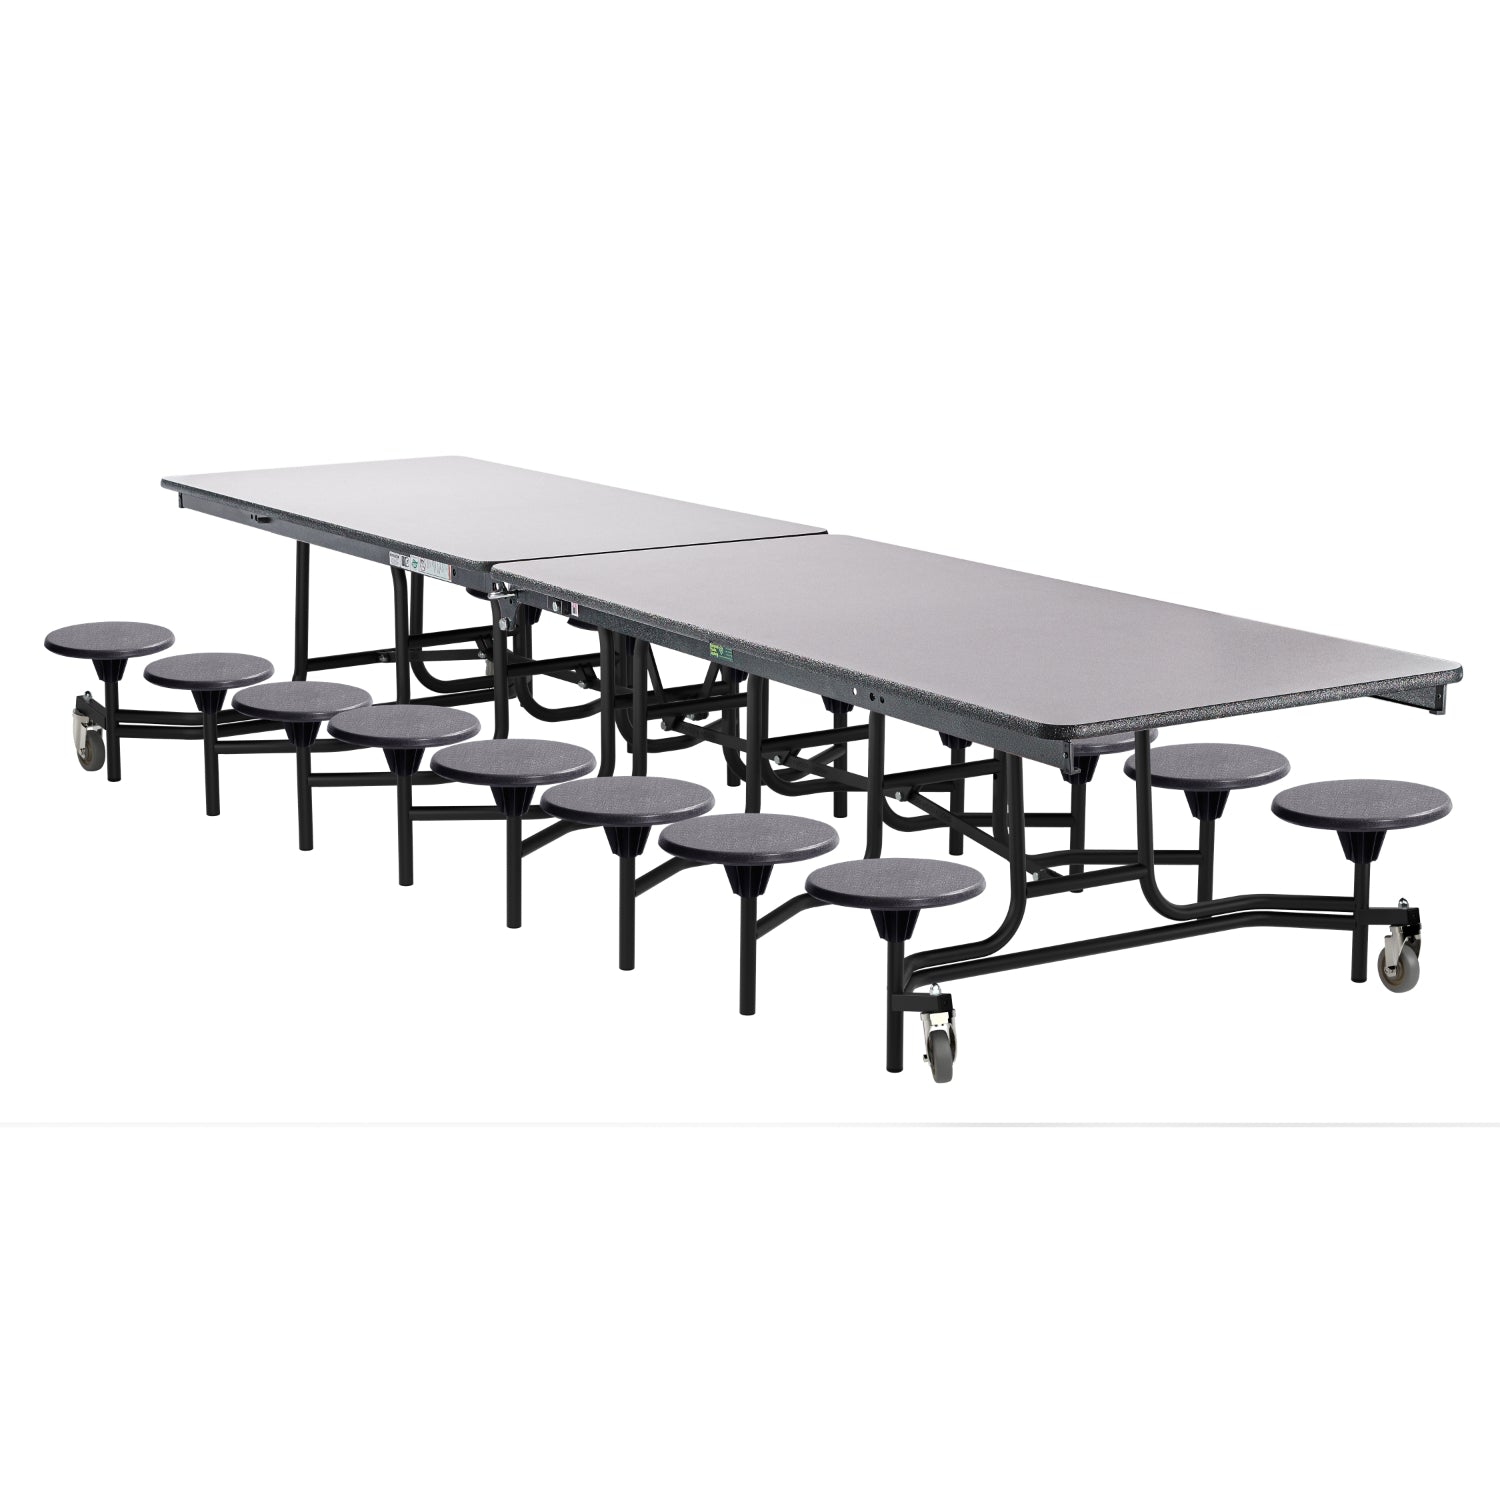 Mobile Cafeteria Table with 16 Stools, 12'L Rectangular, MDF Core, Black ProtectEdge, Textured Black Frame